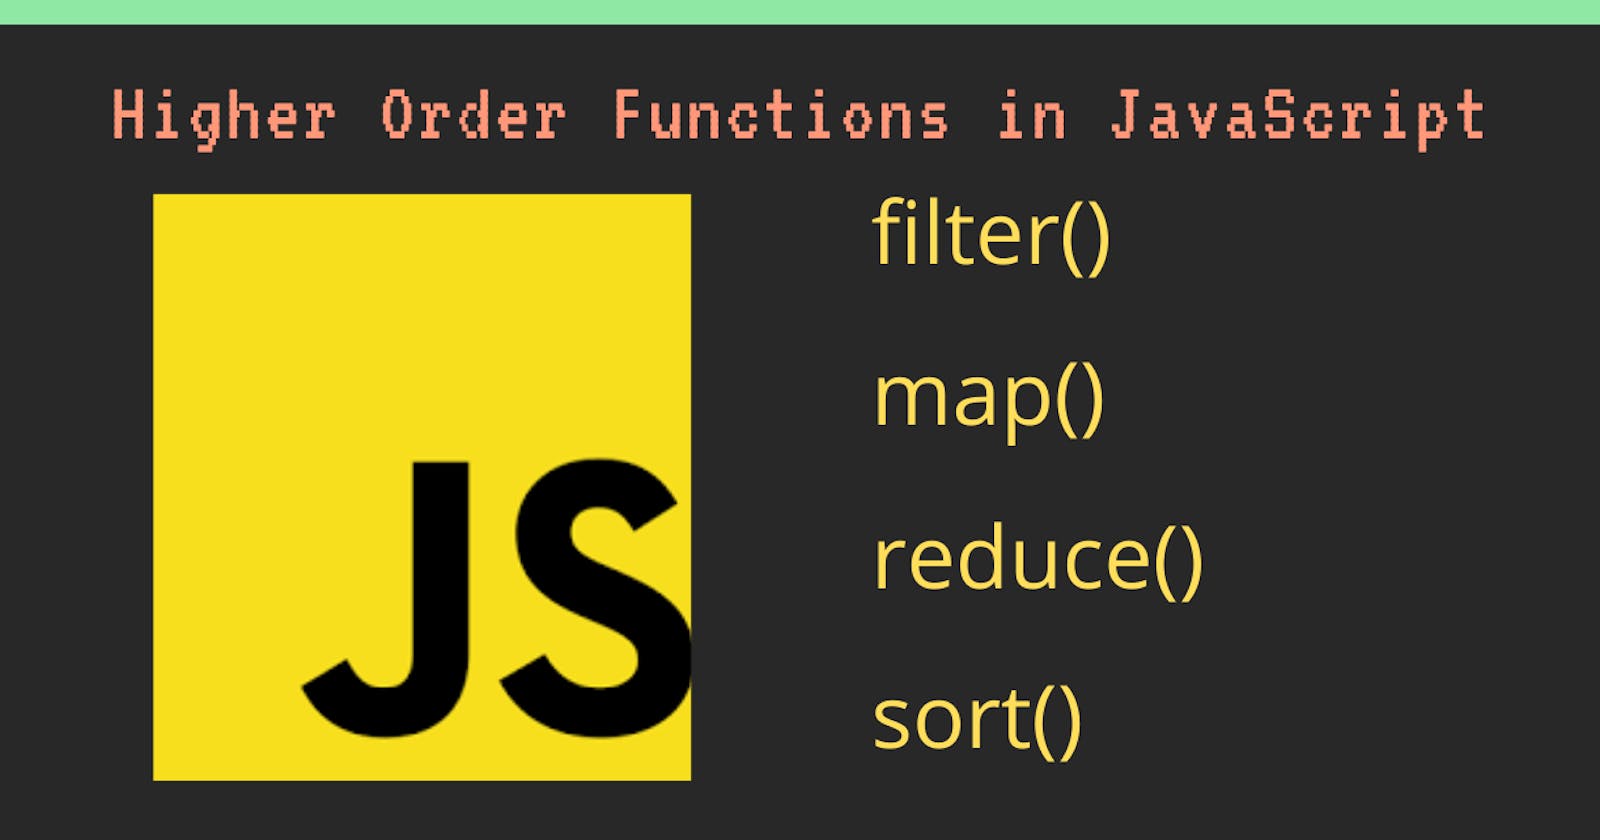 The Top Most Useful Higher-Order Functions for JavaScript Developers